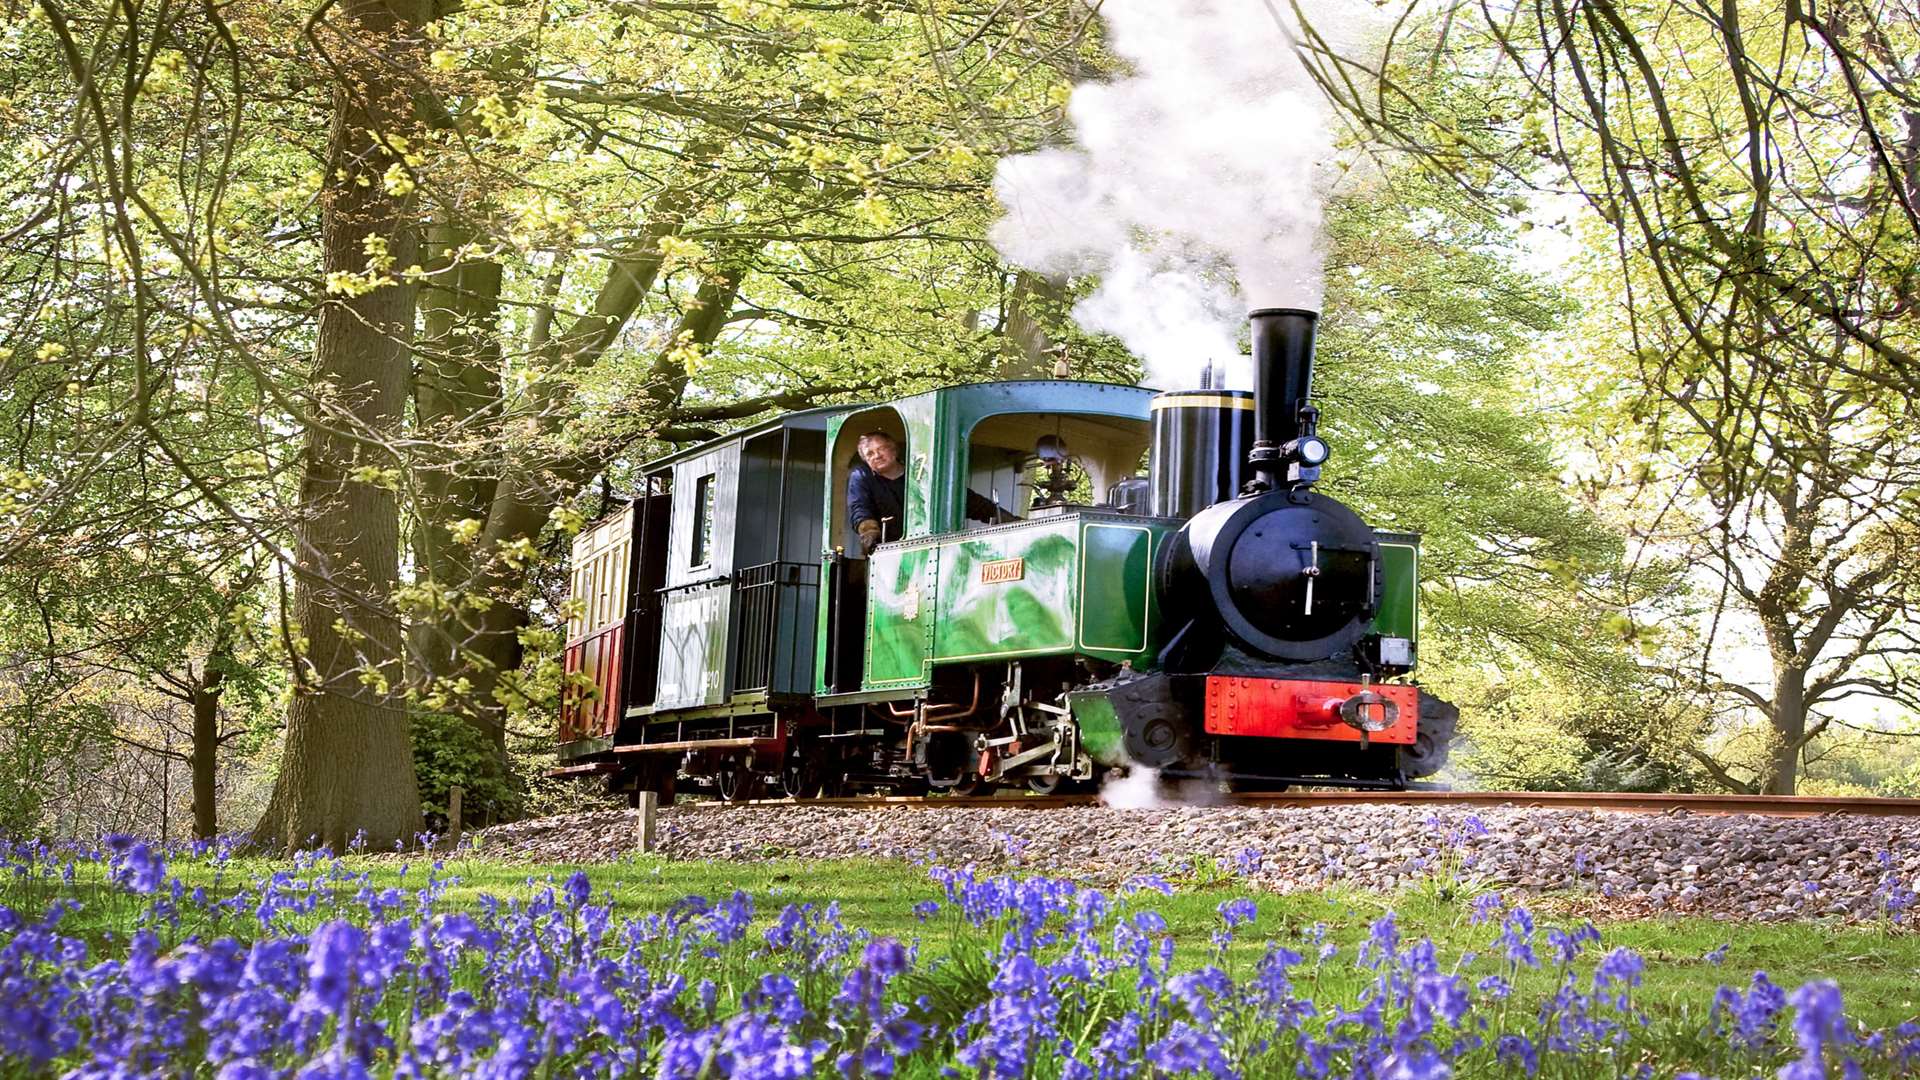 Bredgar and Wormshill Light Railway. Picture: Alan Crotty alan-crotty@tiscali.co.uk